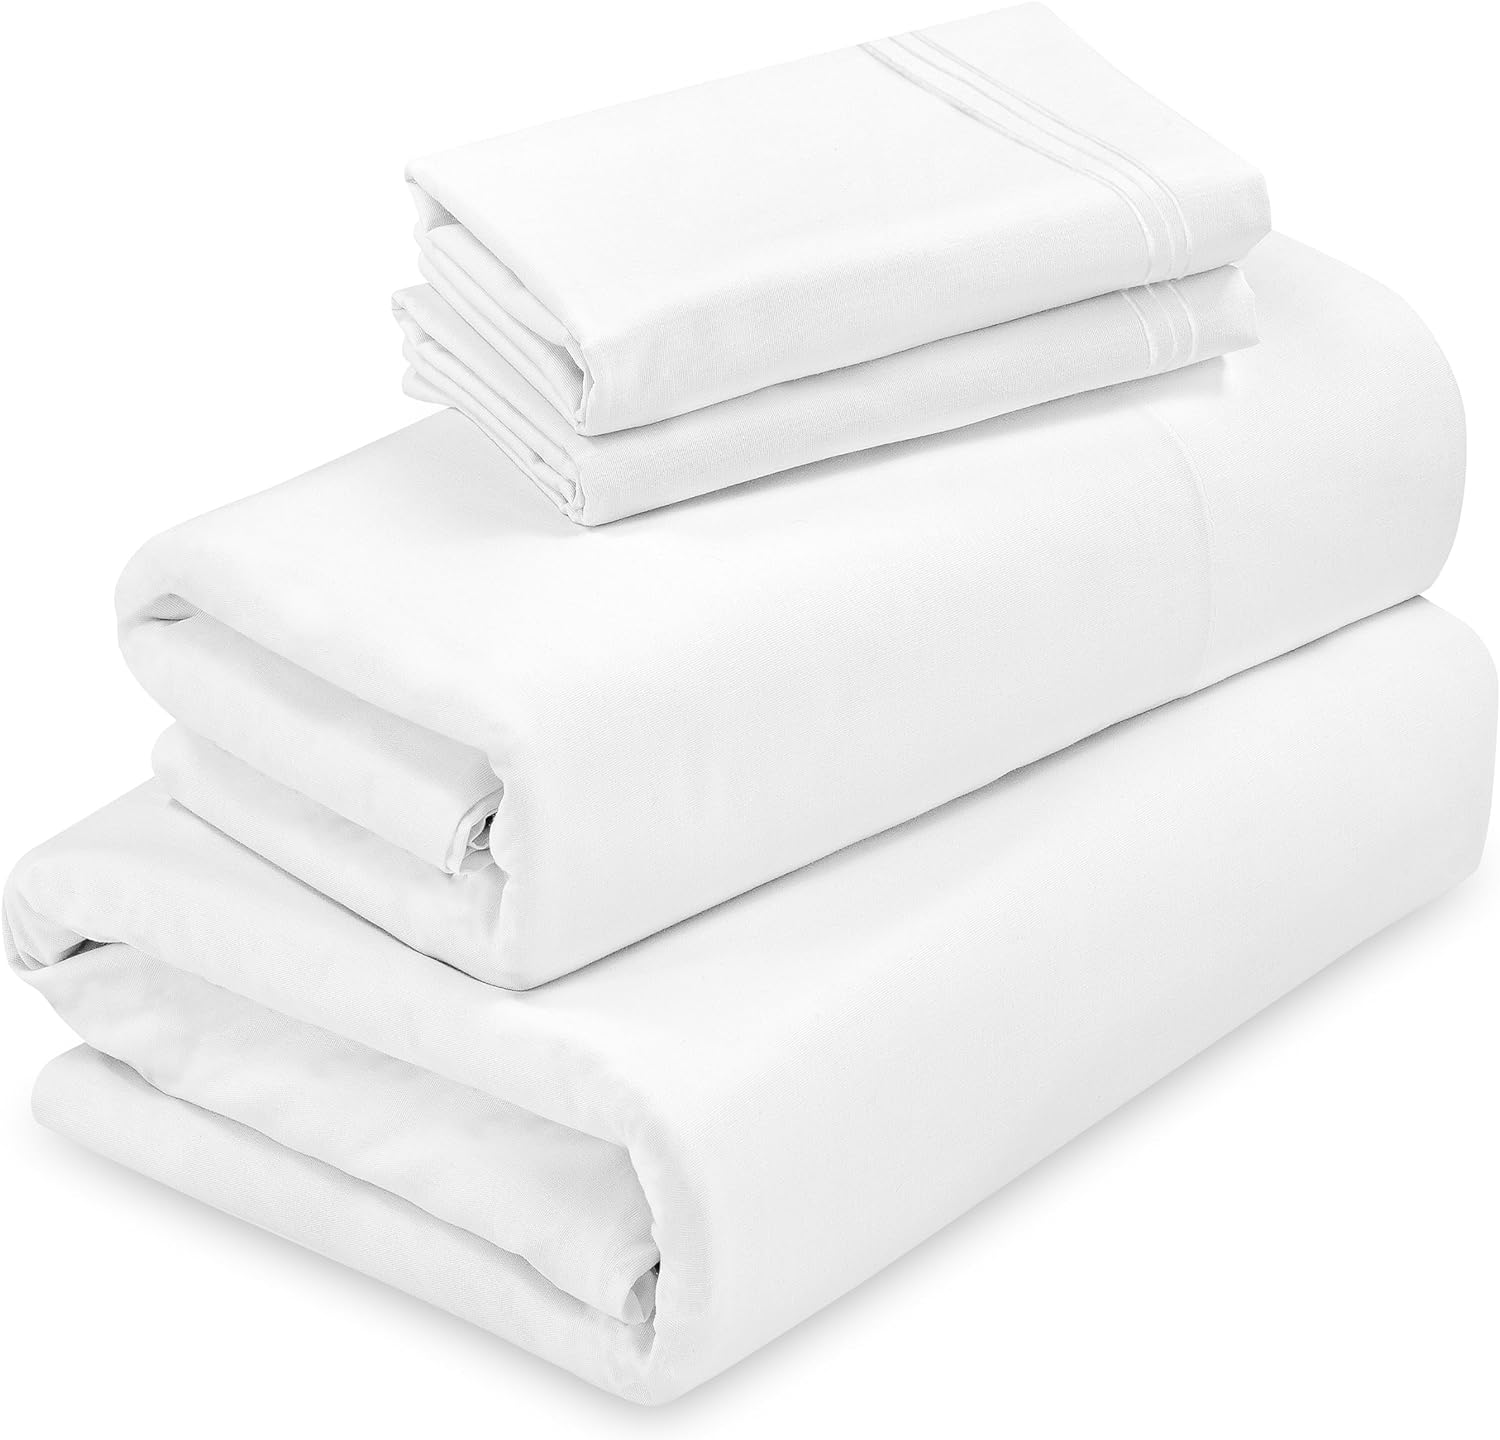 ROYALE LINENS - 4 Piece King Bed Sheet - Soft Brushed Microfiber 1800 Bedding Set - 1 Fitted Sheet, 1 Flat Sheet, 2 Pillow Cases - Wrinkle & Fade Resistant Luxury King Size Sheet Set (King, White)